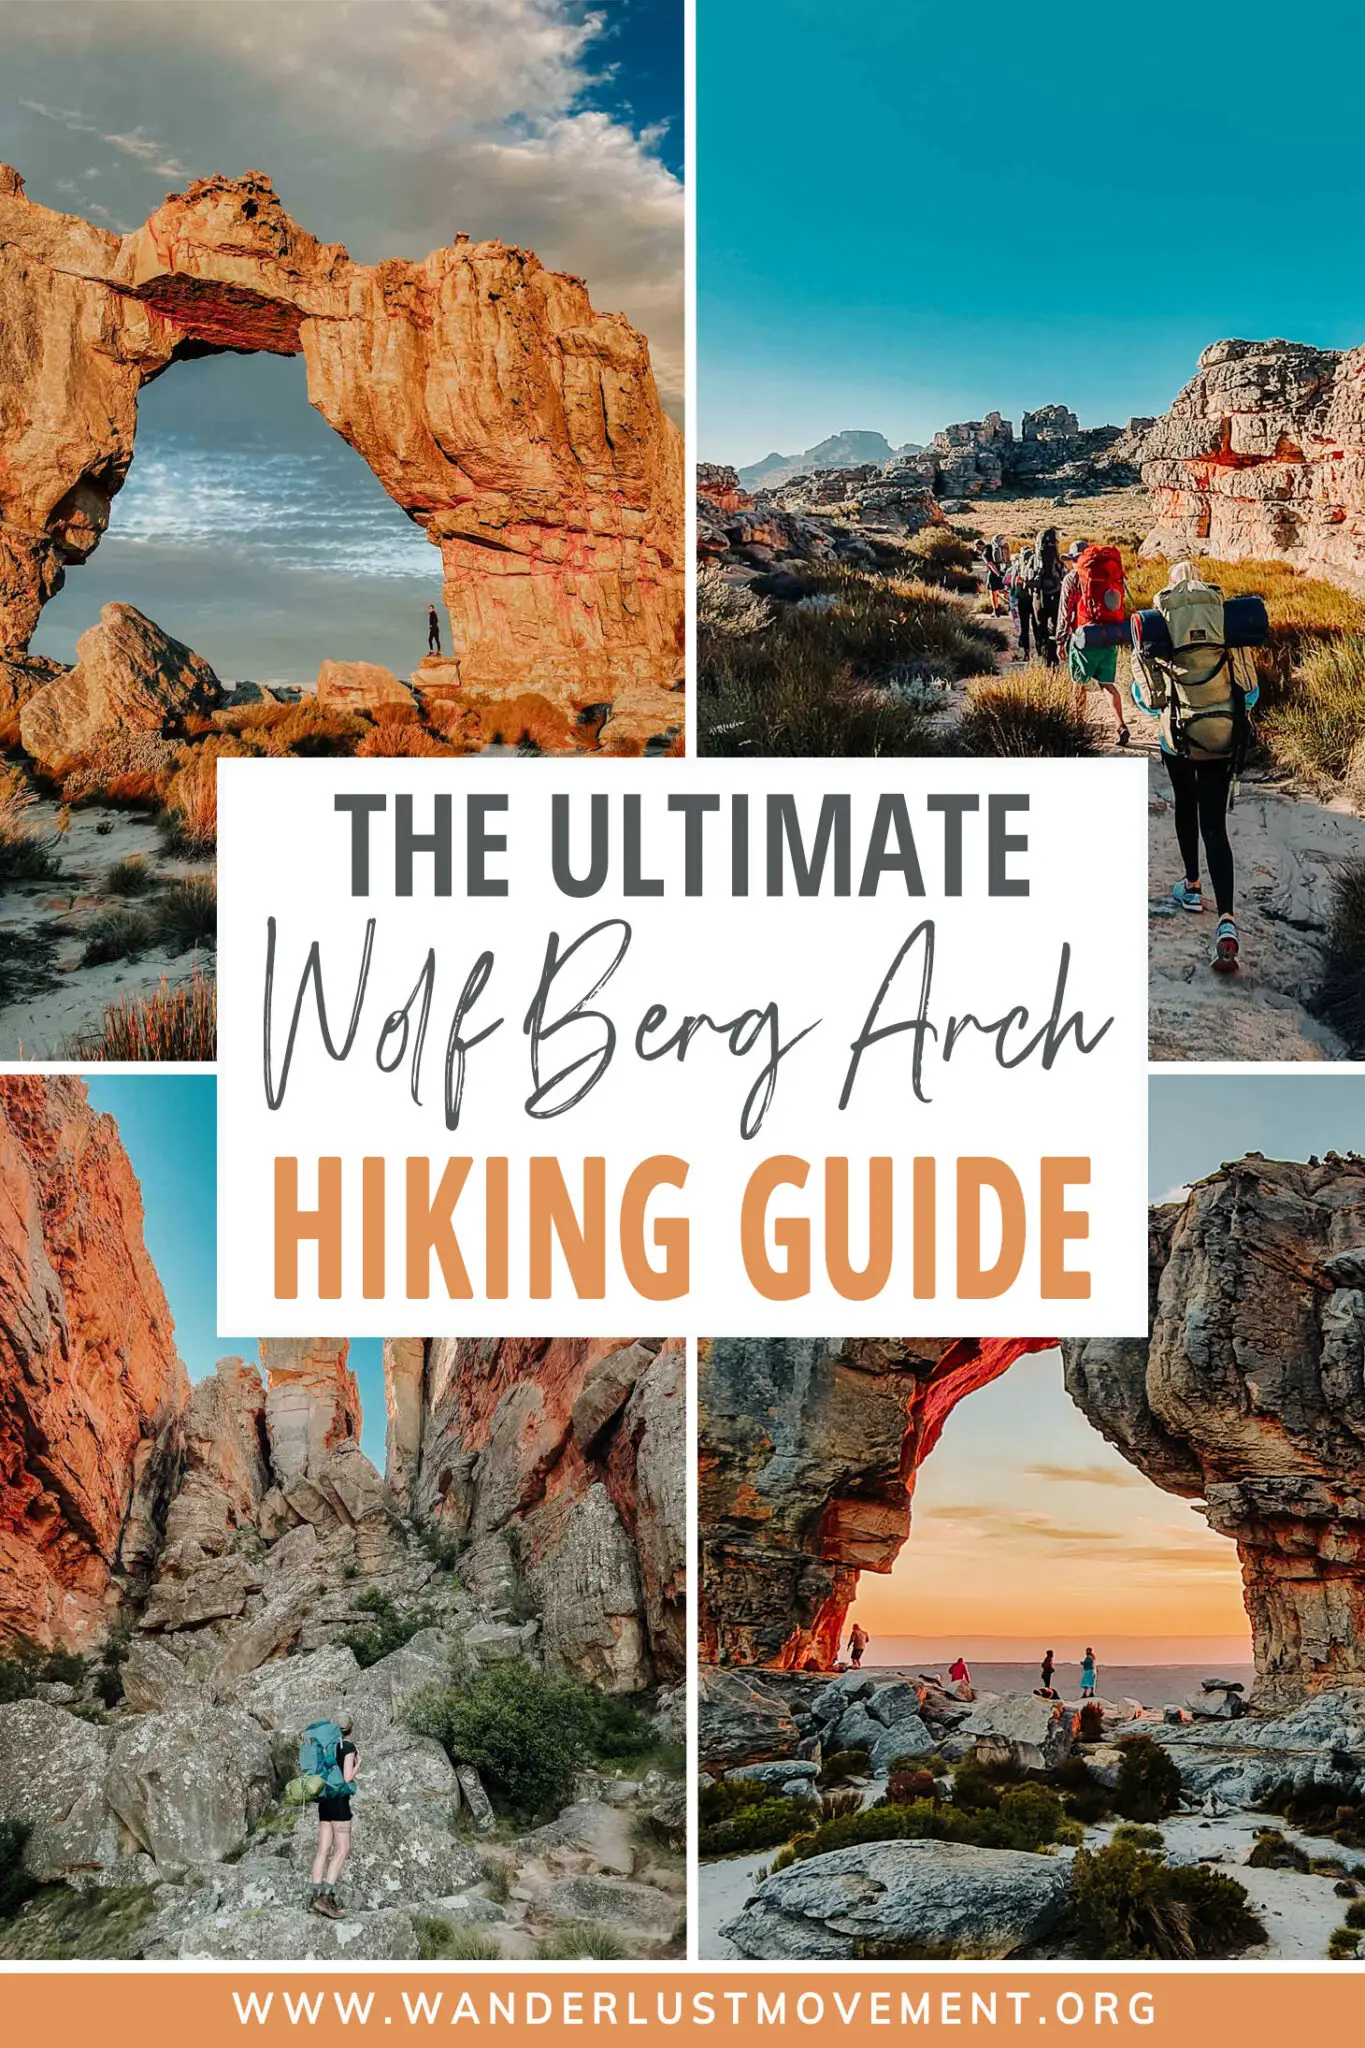 The Ultimate Wolfberg Arch Hiking Guide